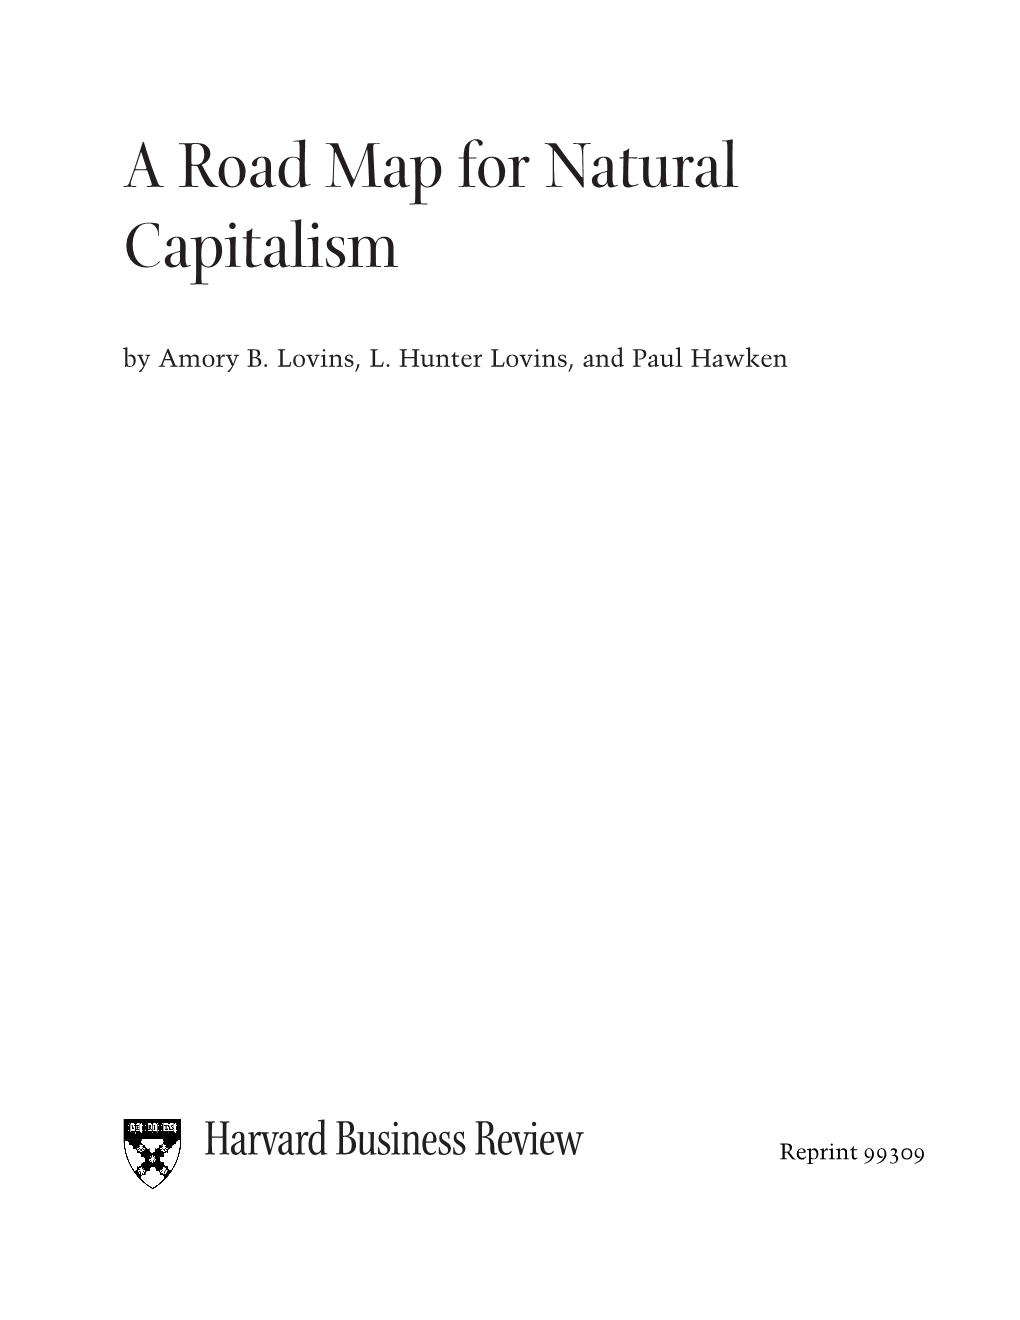 A Road Map for Natural Capitalism by Amory B